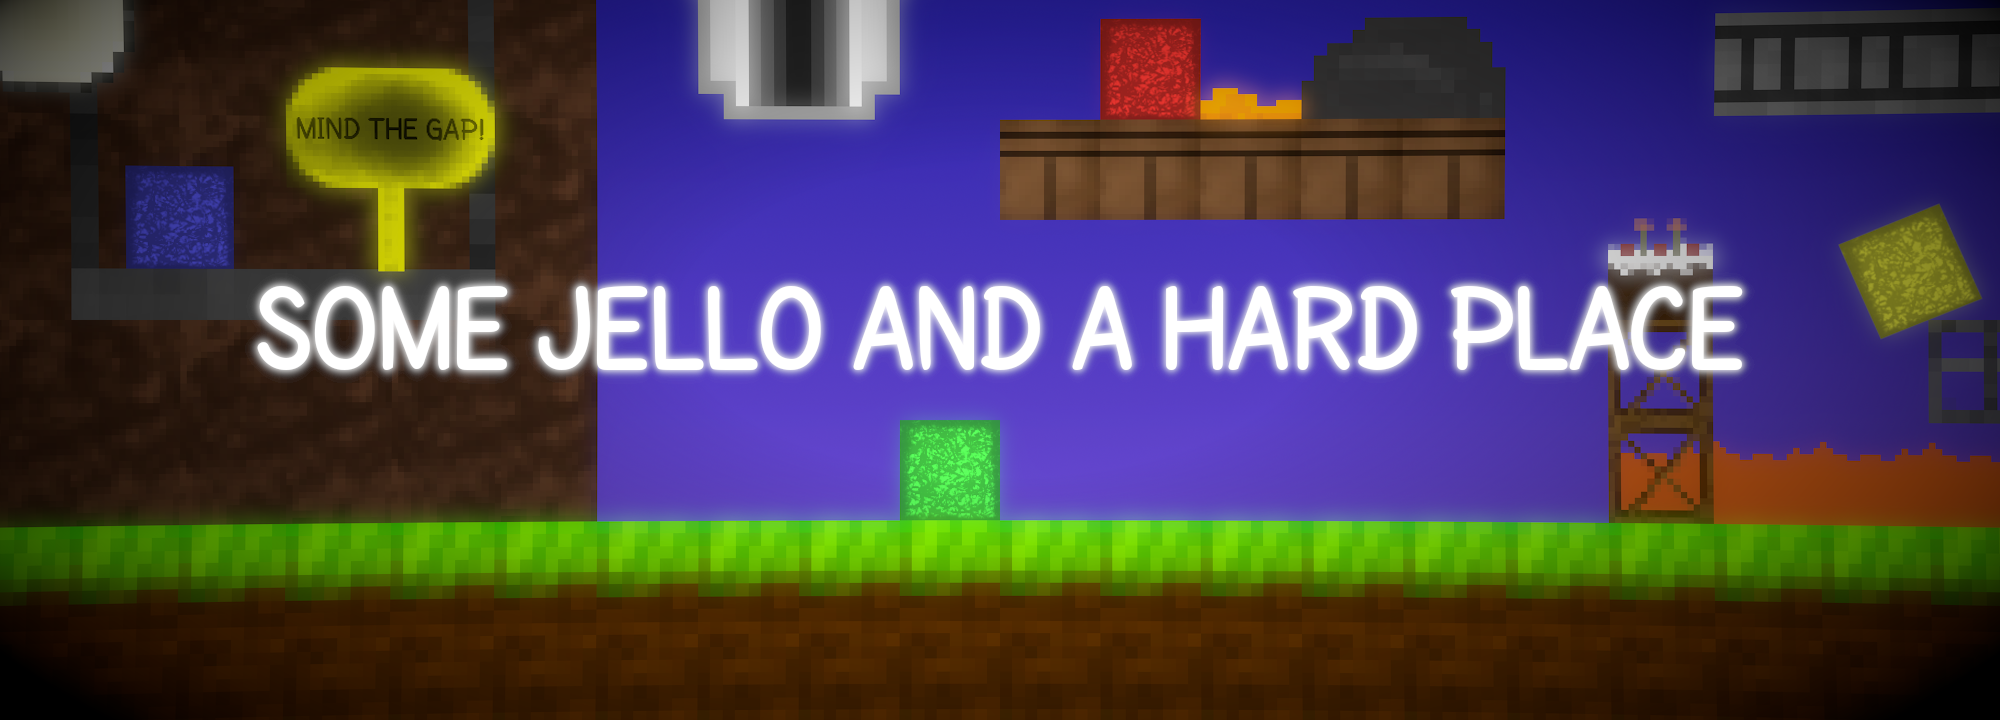 Some Jello and a Hard Place v 1.5.1